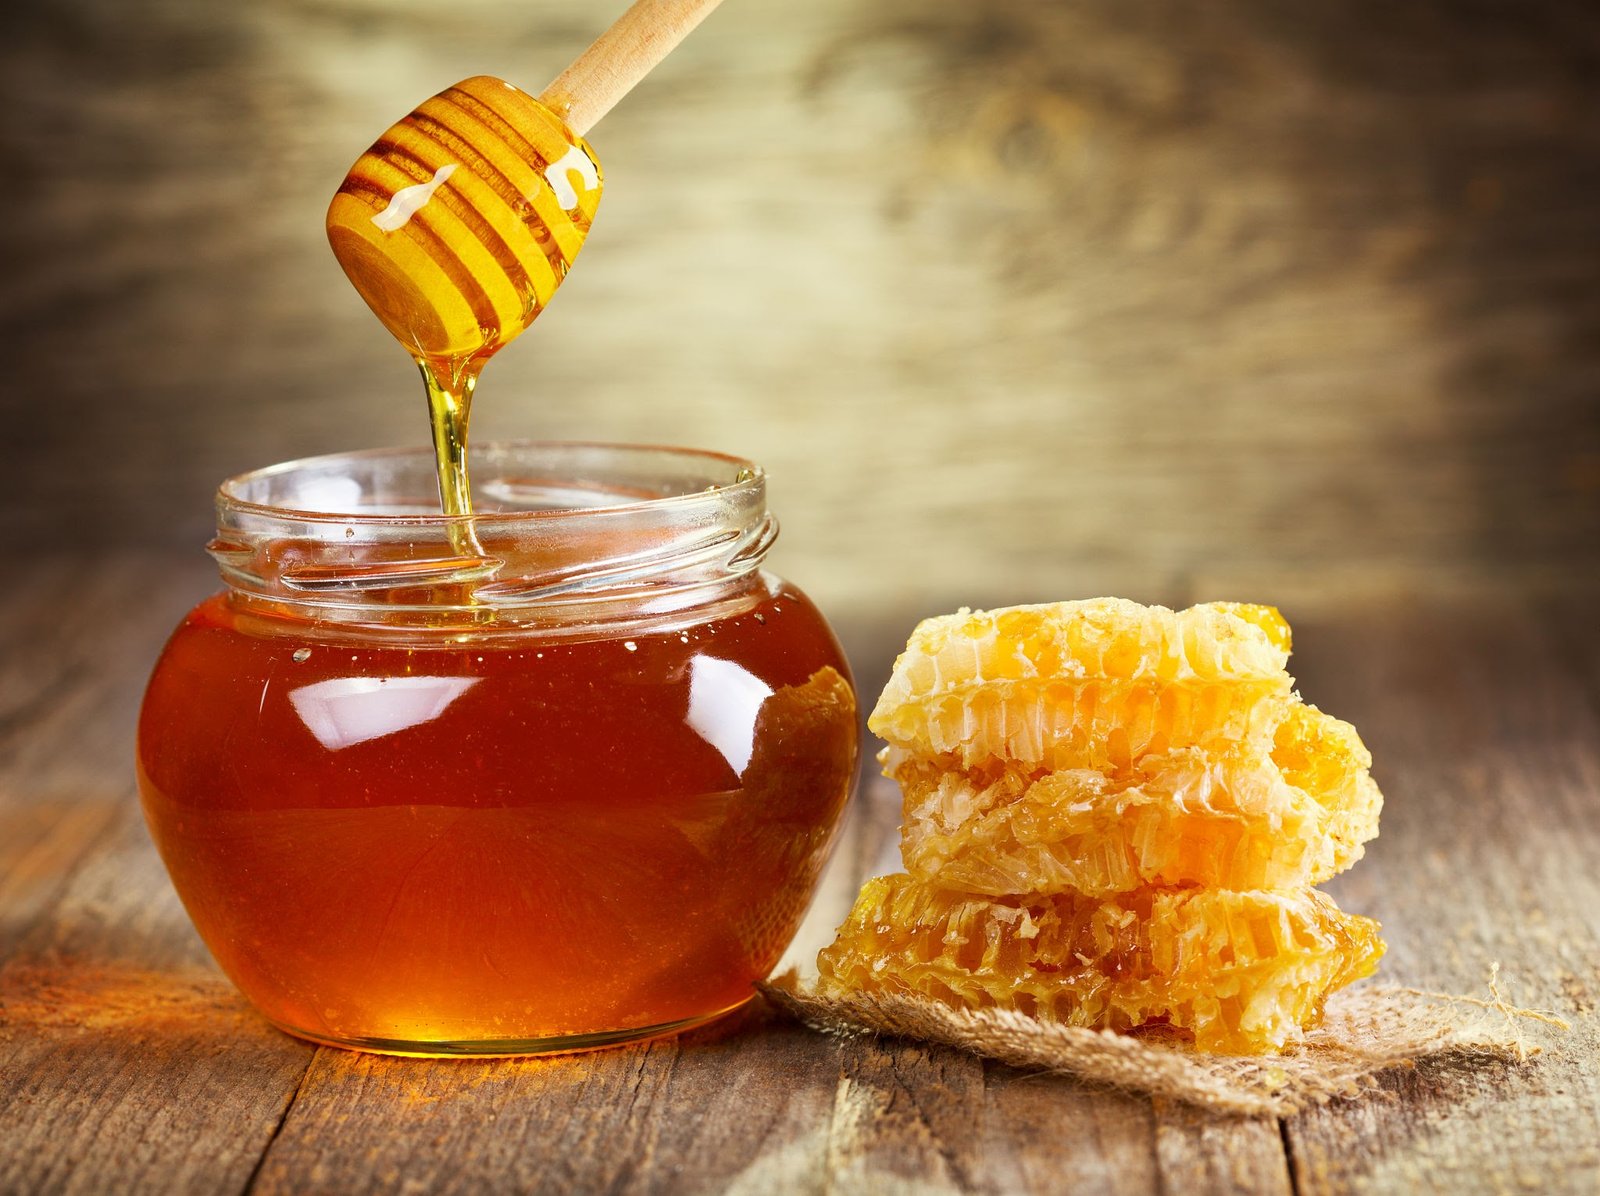 About Honey